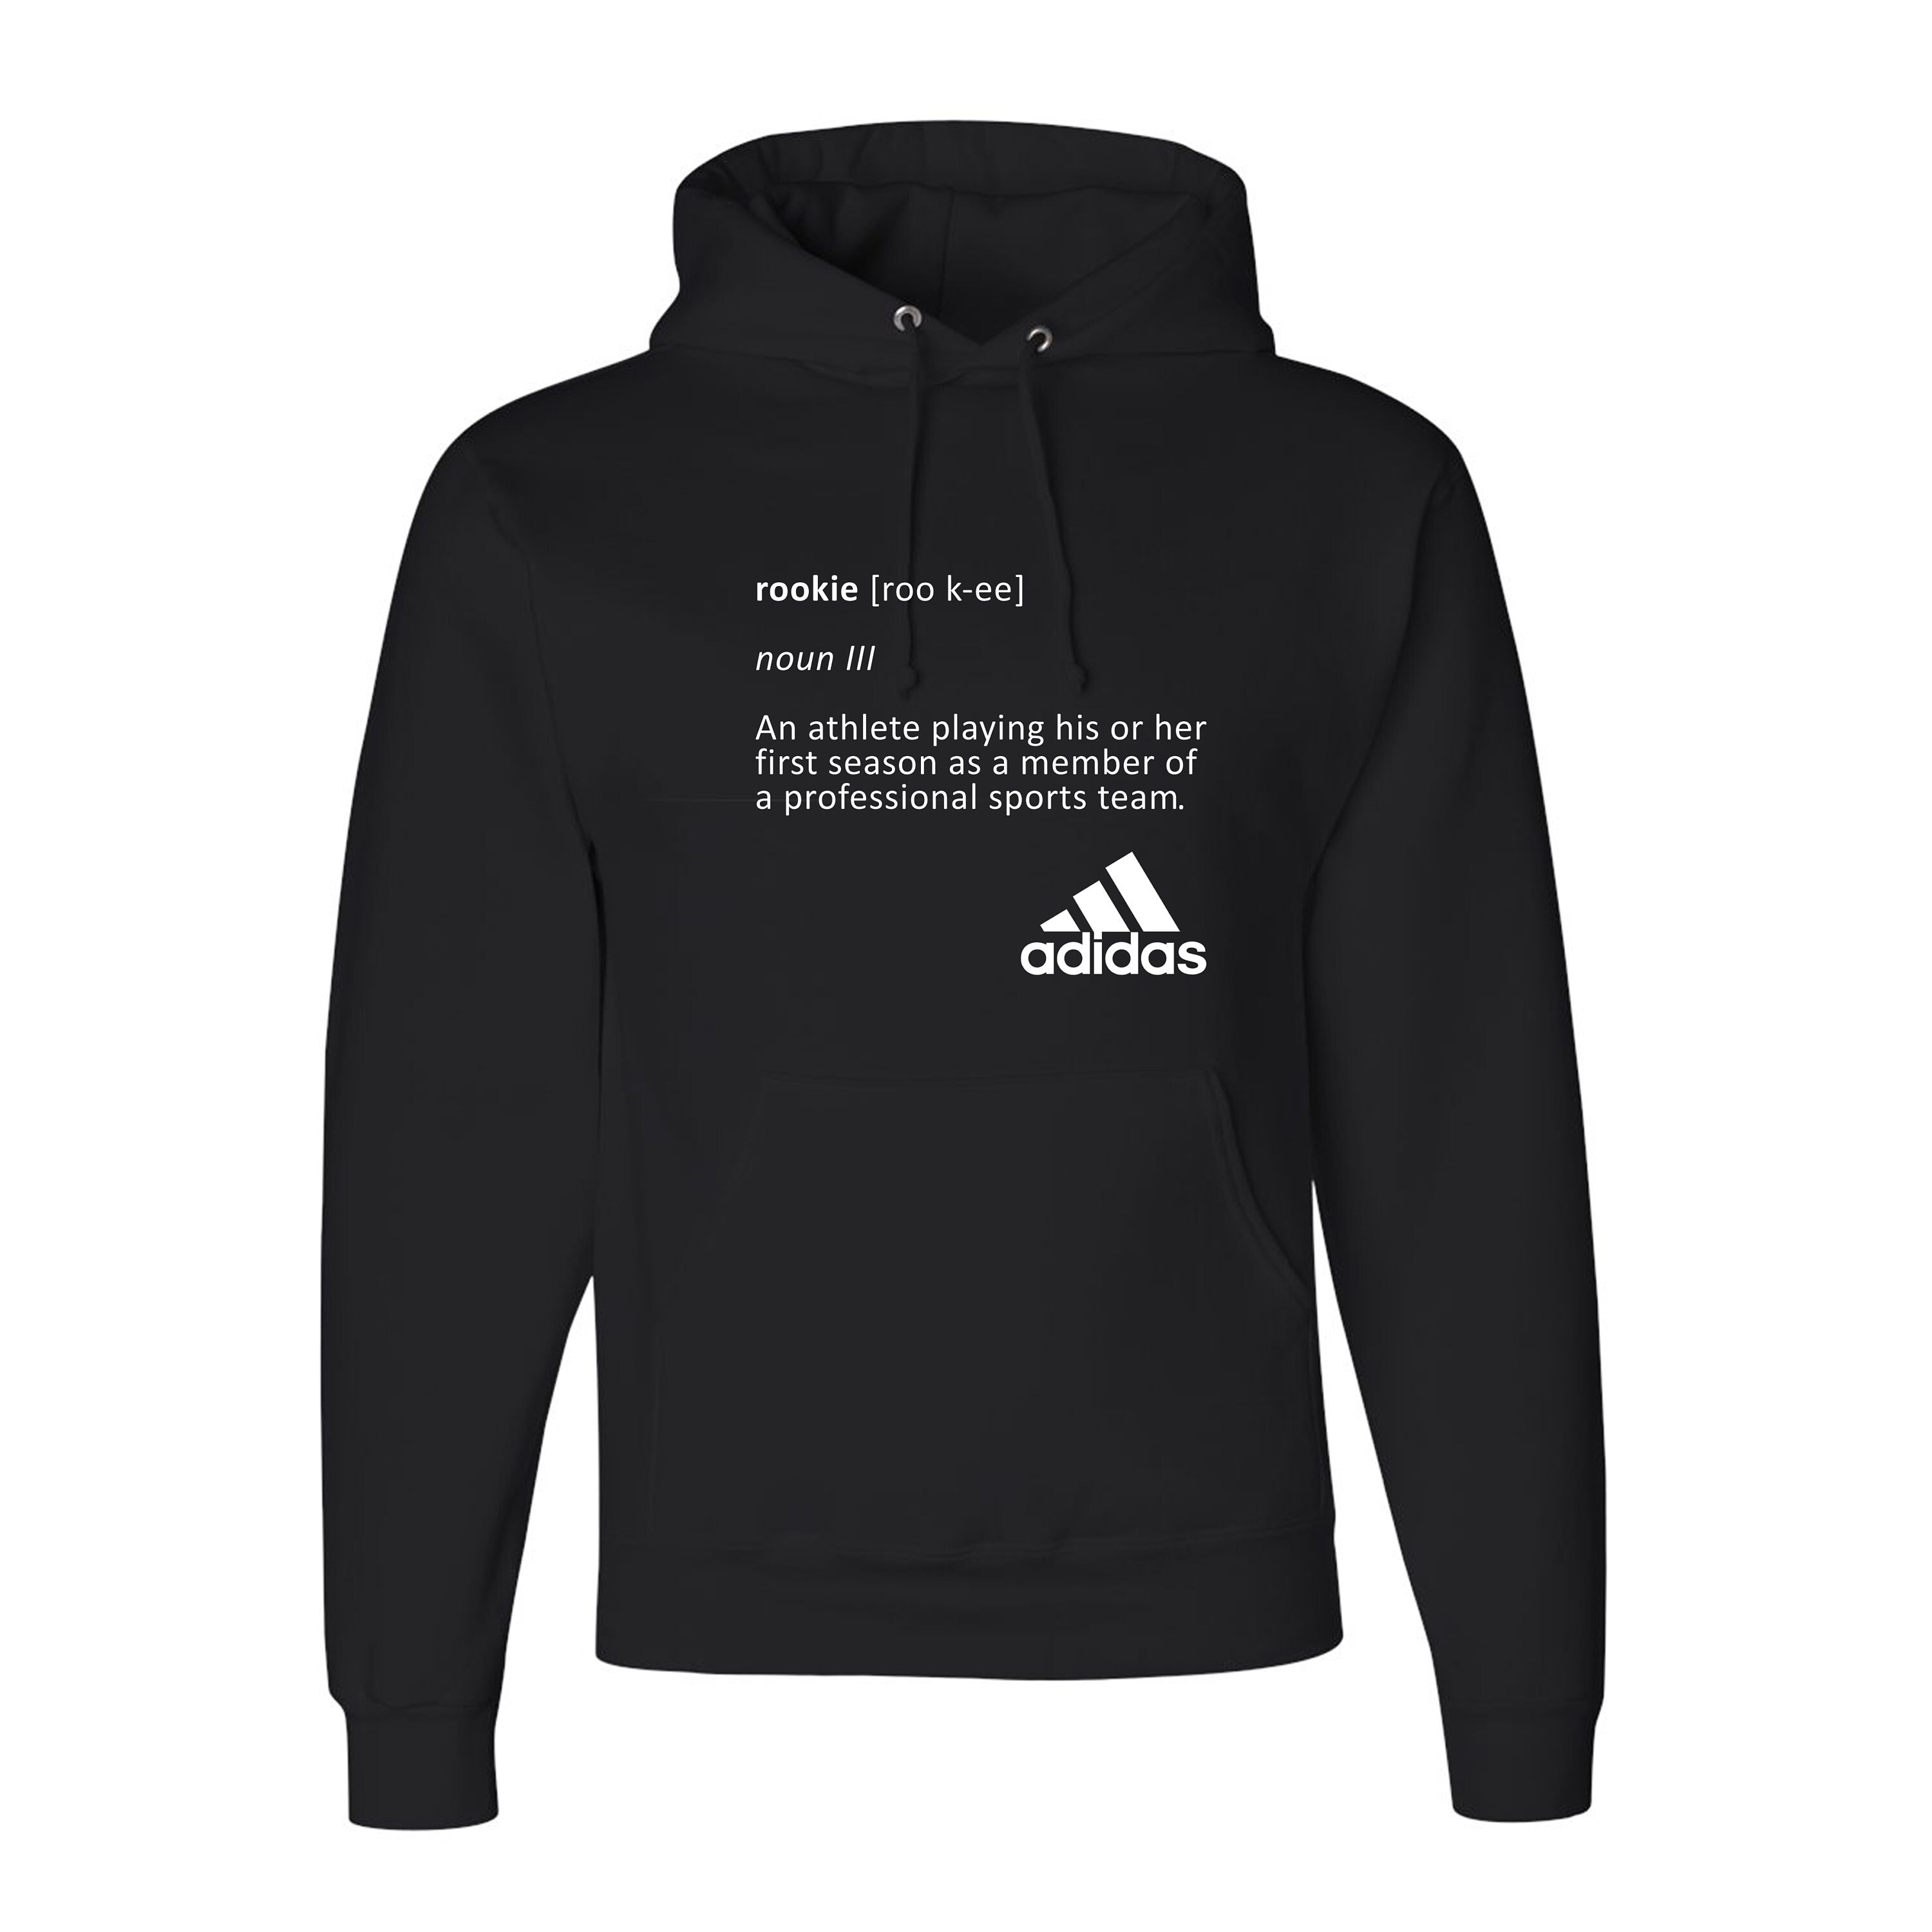 Donovan Mitchell With Another Trolling Hoodie.... | Page 5 | Sports ...